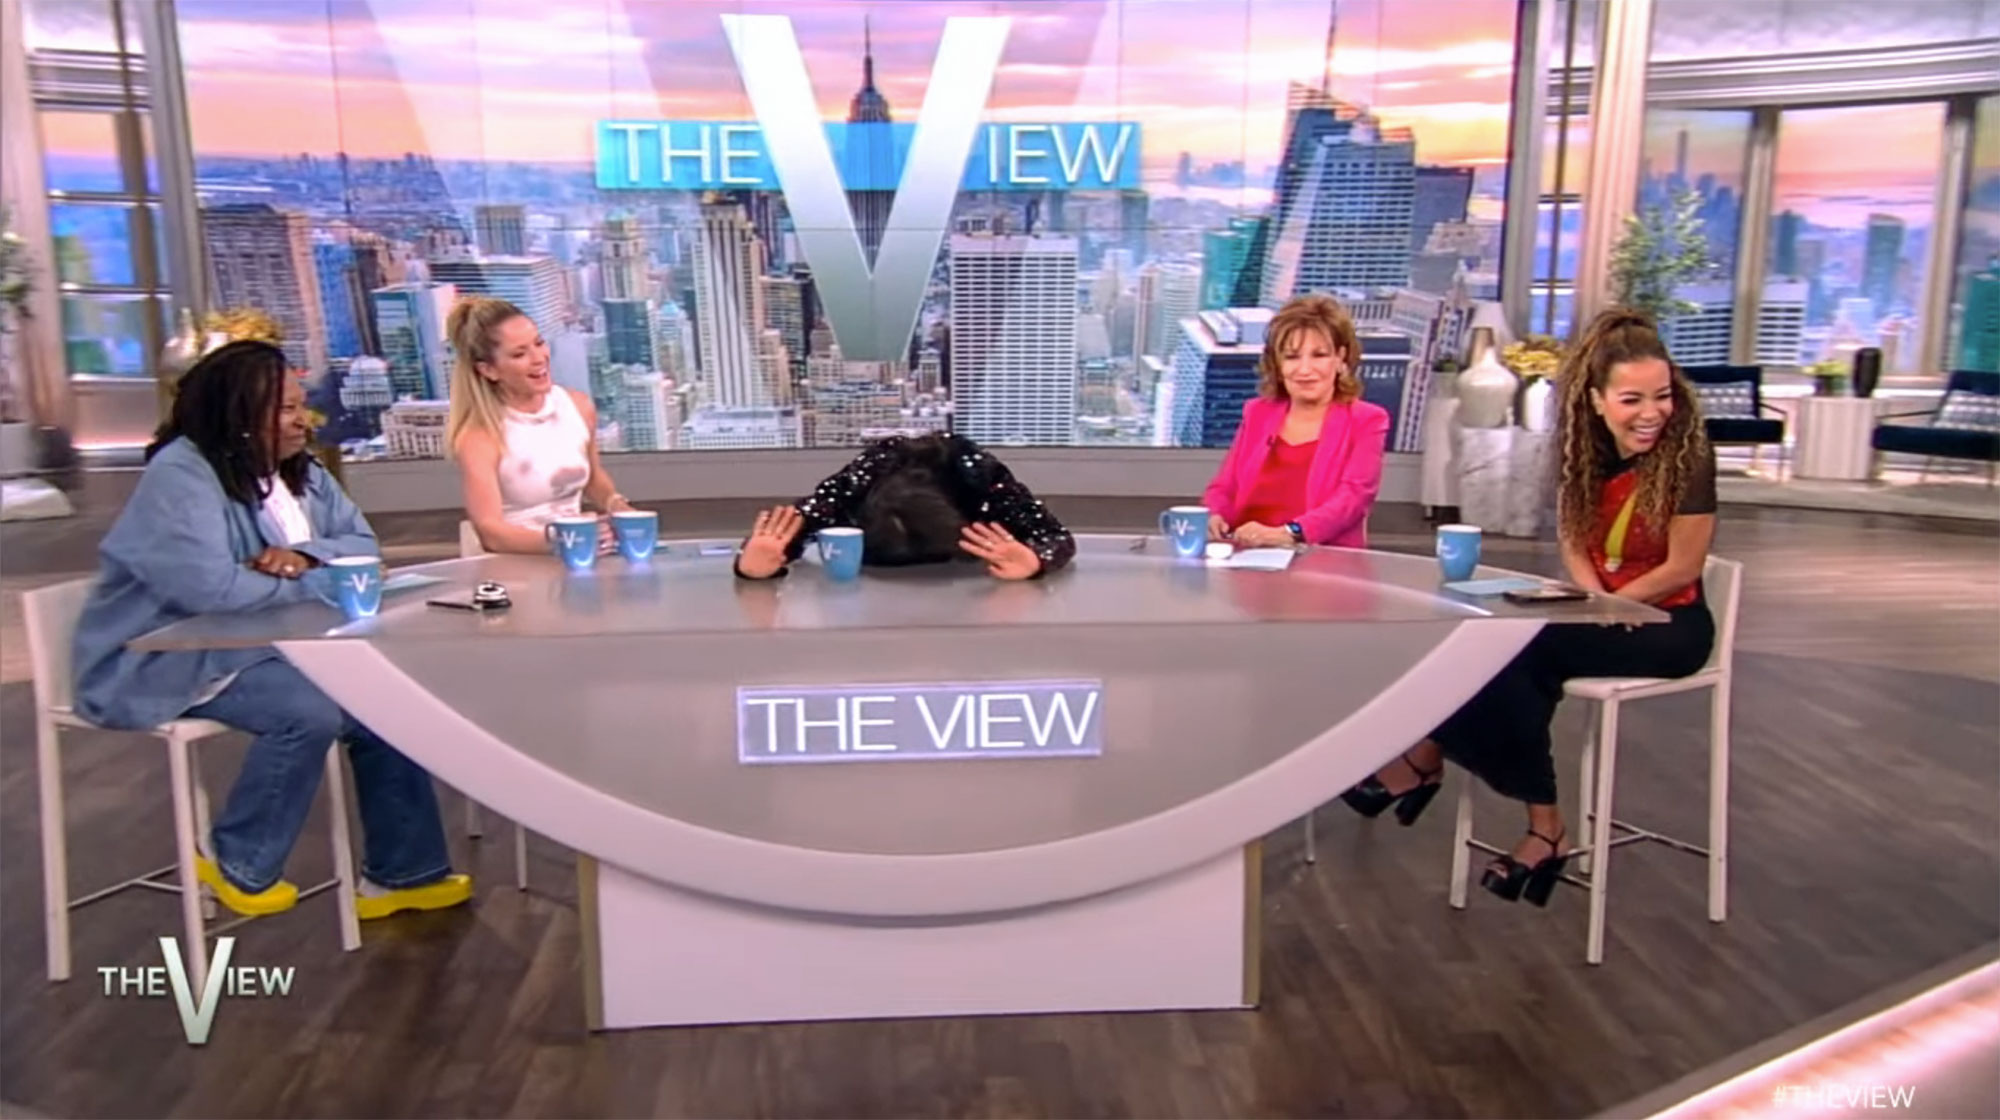 Jameela Jamil drops F-bomb, falls to the table in bizarre interview on The View: 'Never trust a fart'